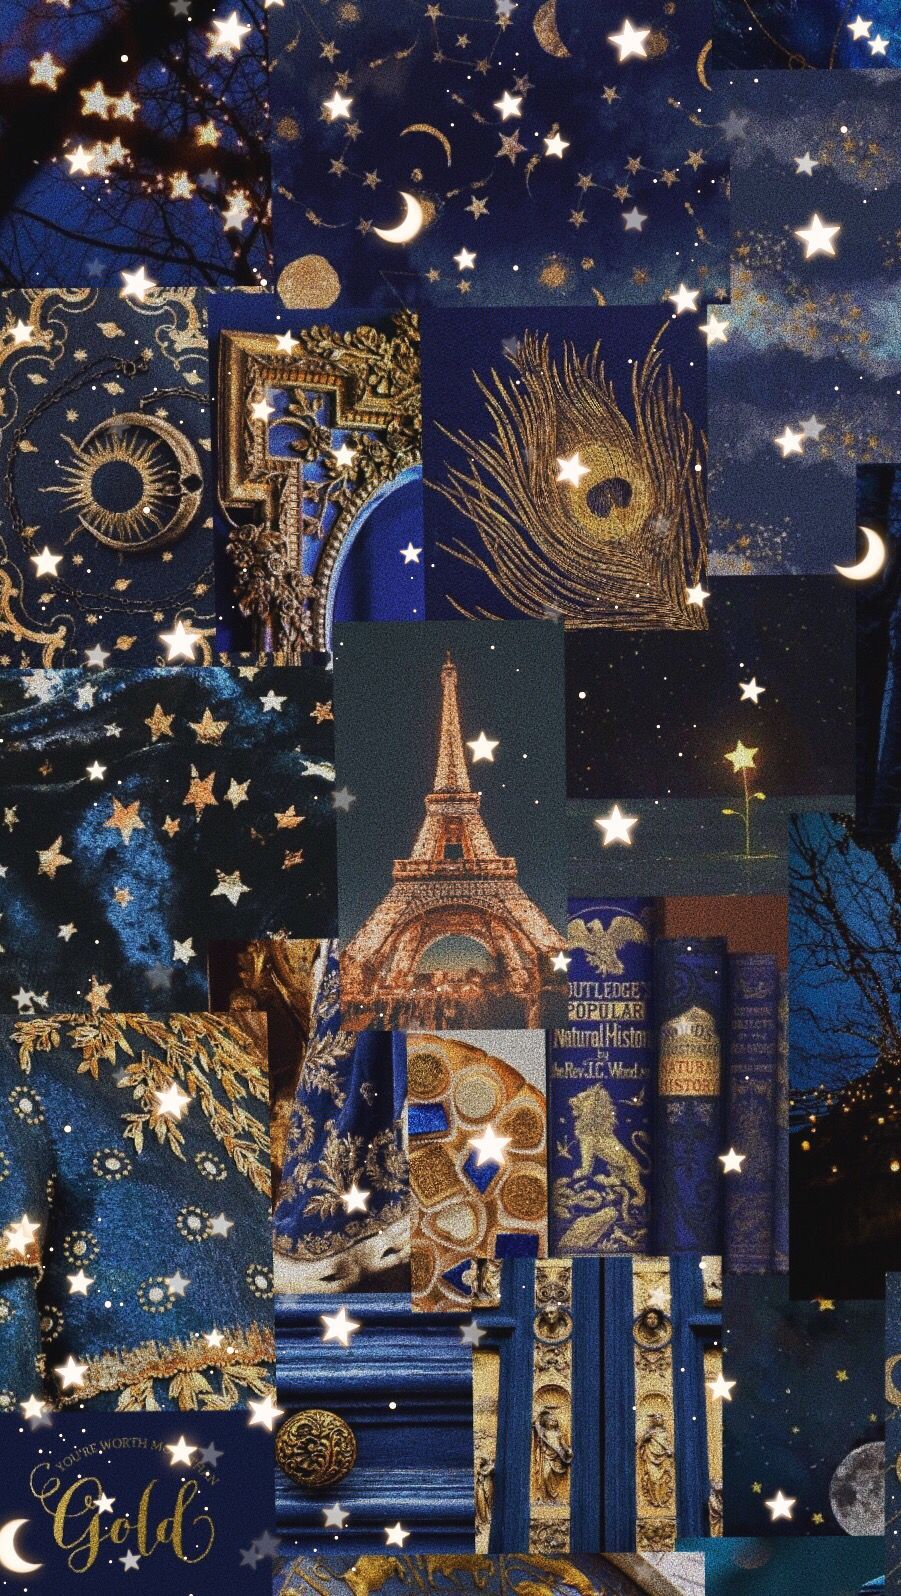 A collage of a blue and gold aesthetic with books, stars, and the Eiffel Tower. - Gold